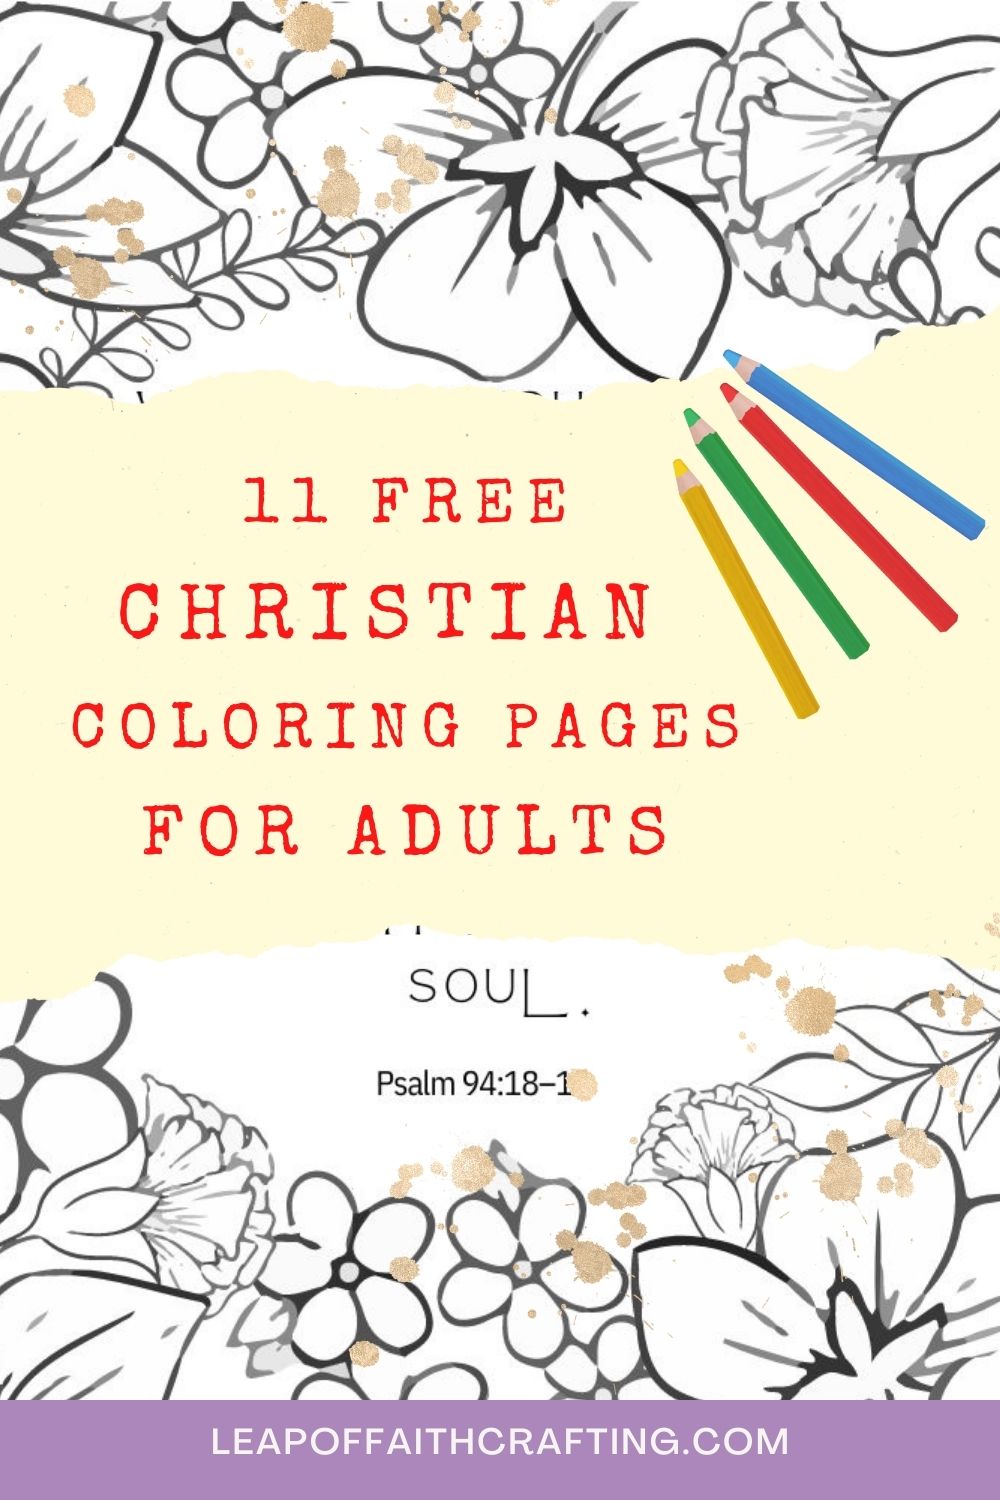 https://leapoffaithcrafting.com/wp-content/uploads/2021/12/christian-coloring-pages-for-adults-pin.jpg